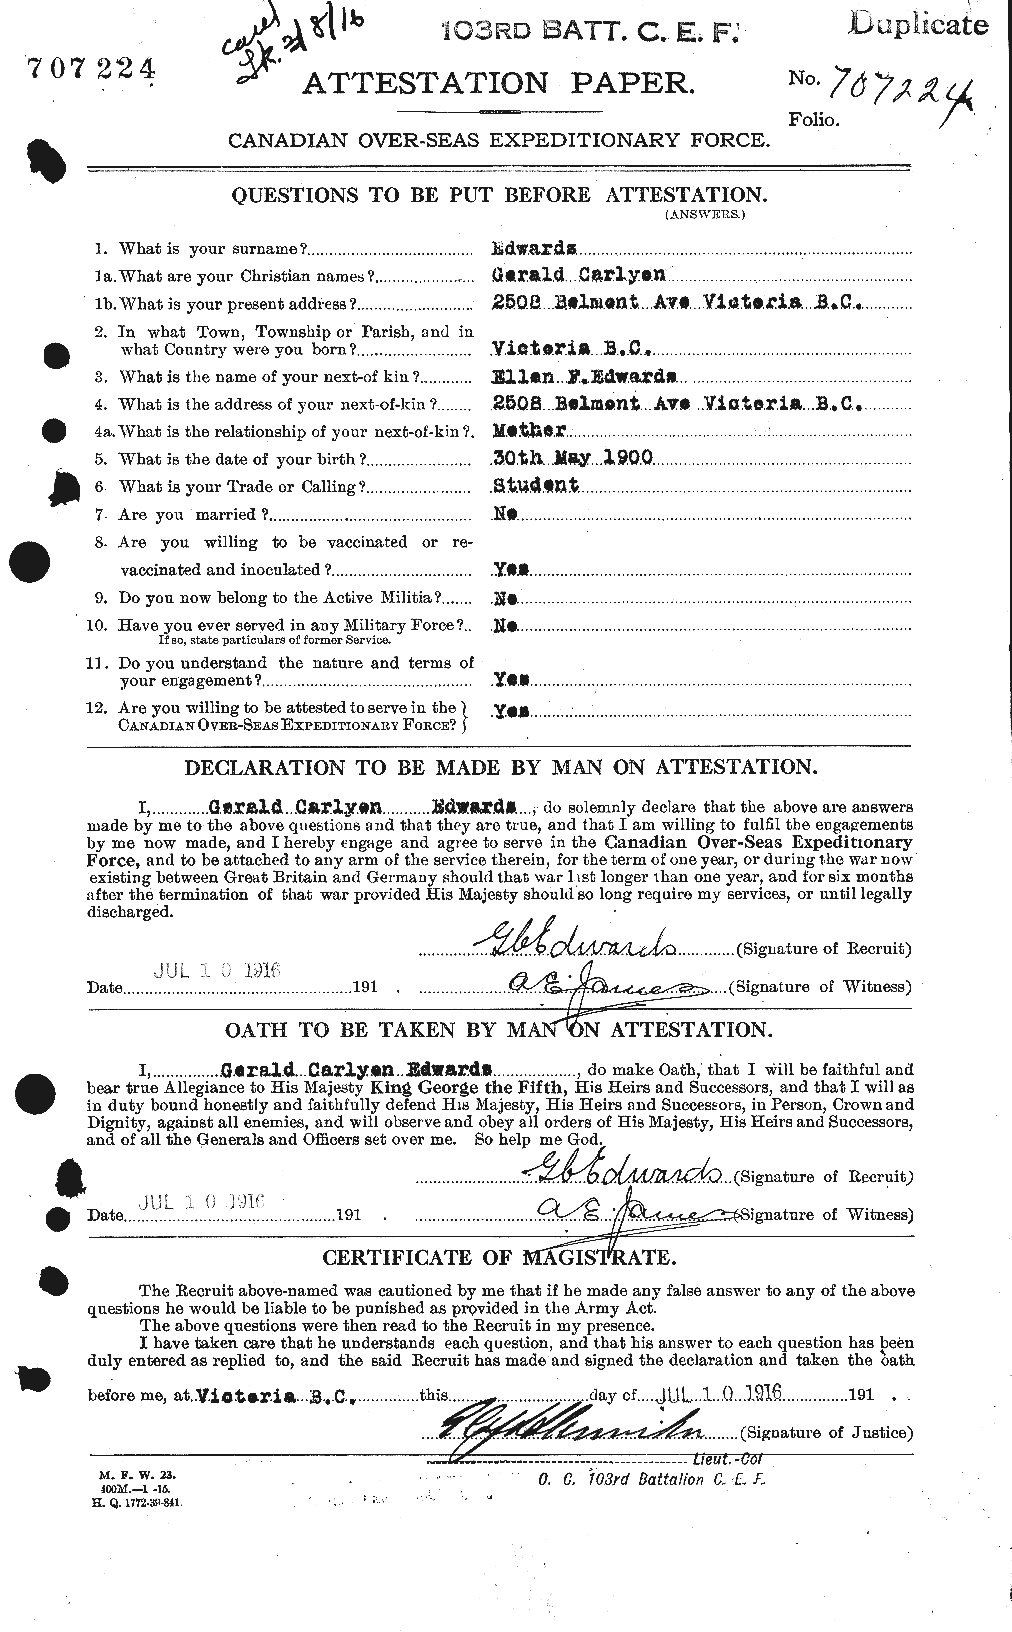 Personnel Records of the First World War - CEF 309699a